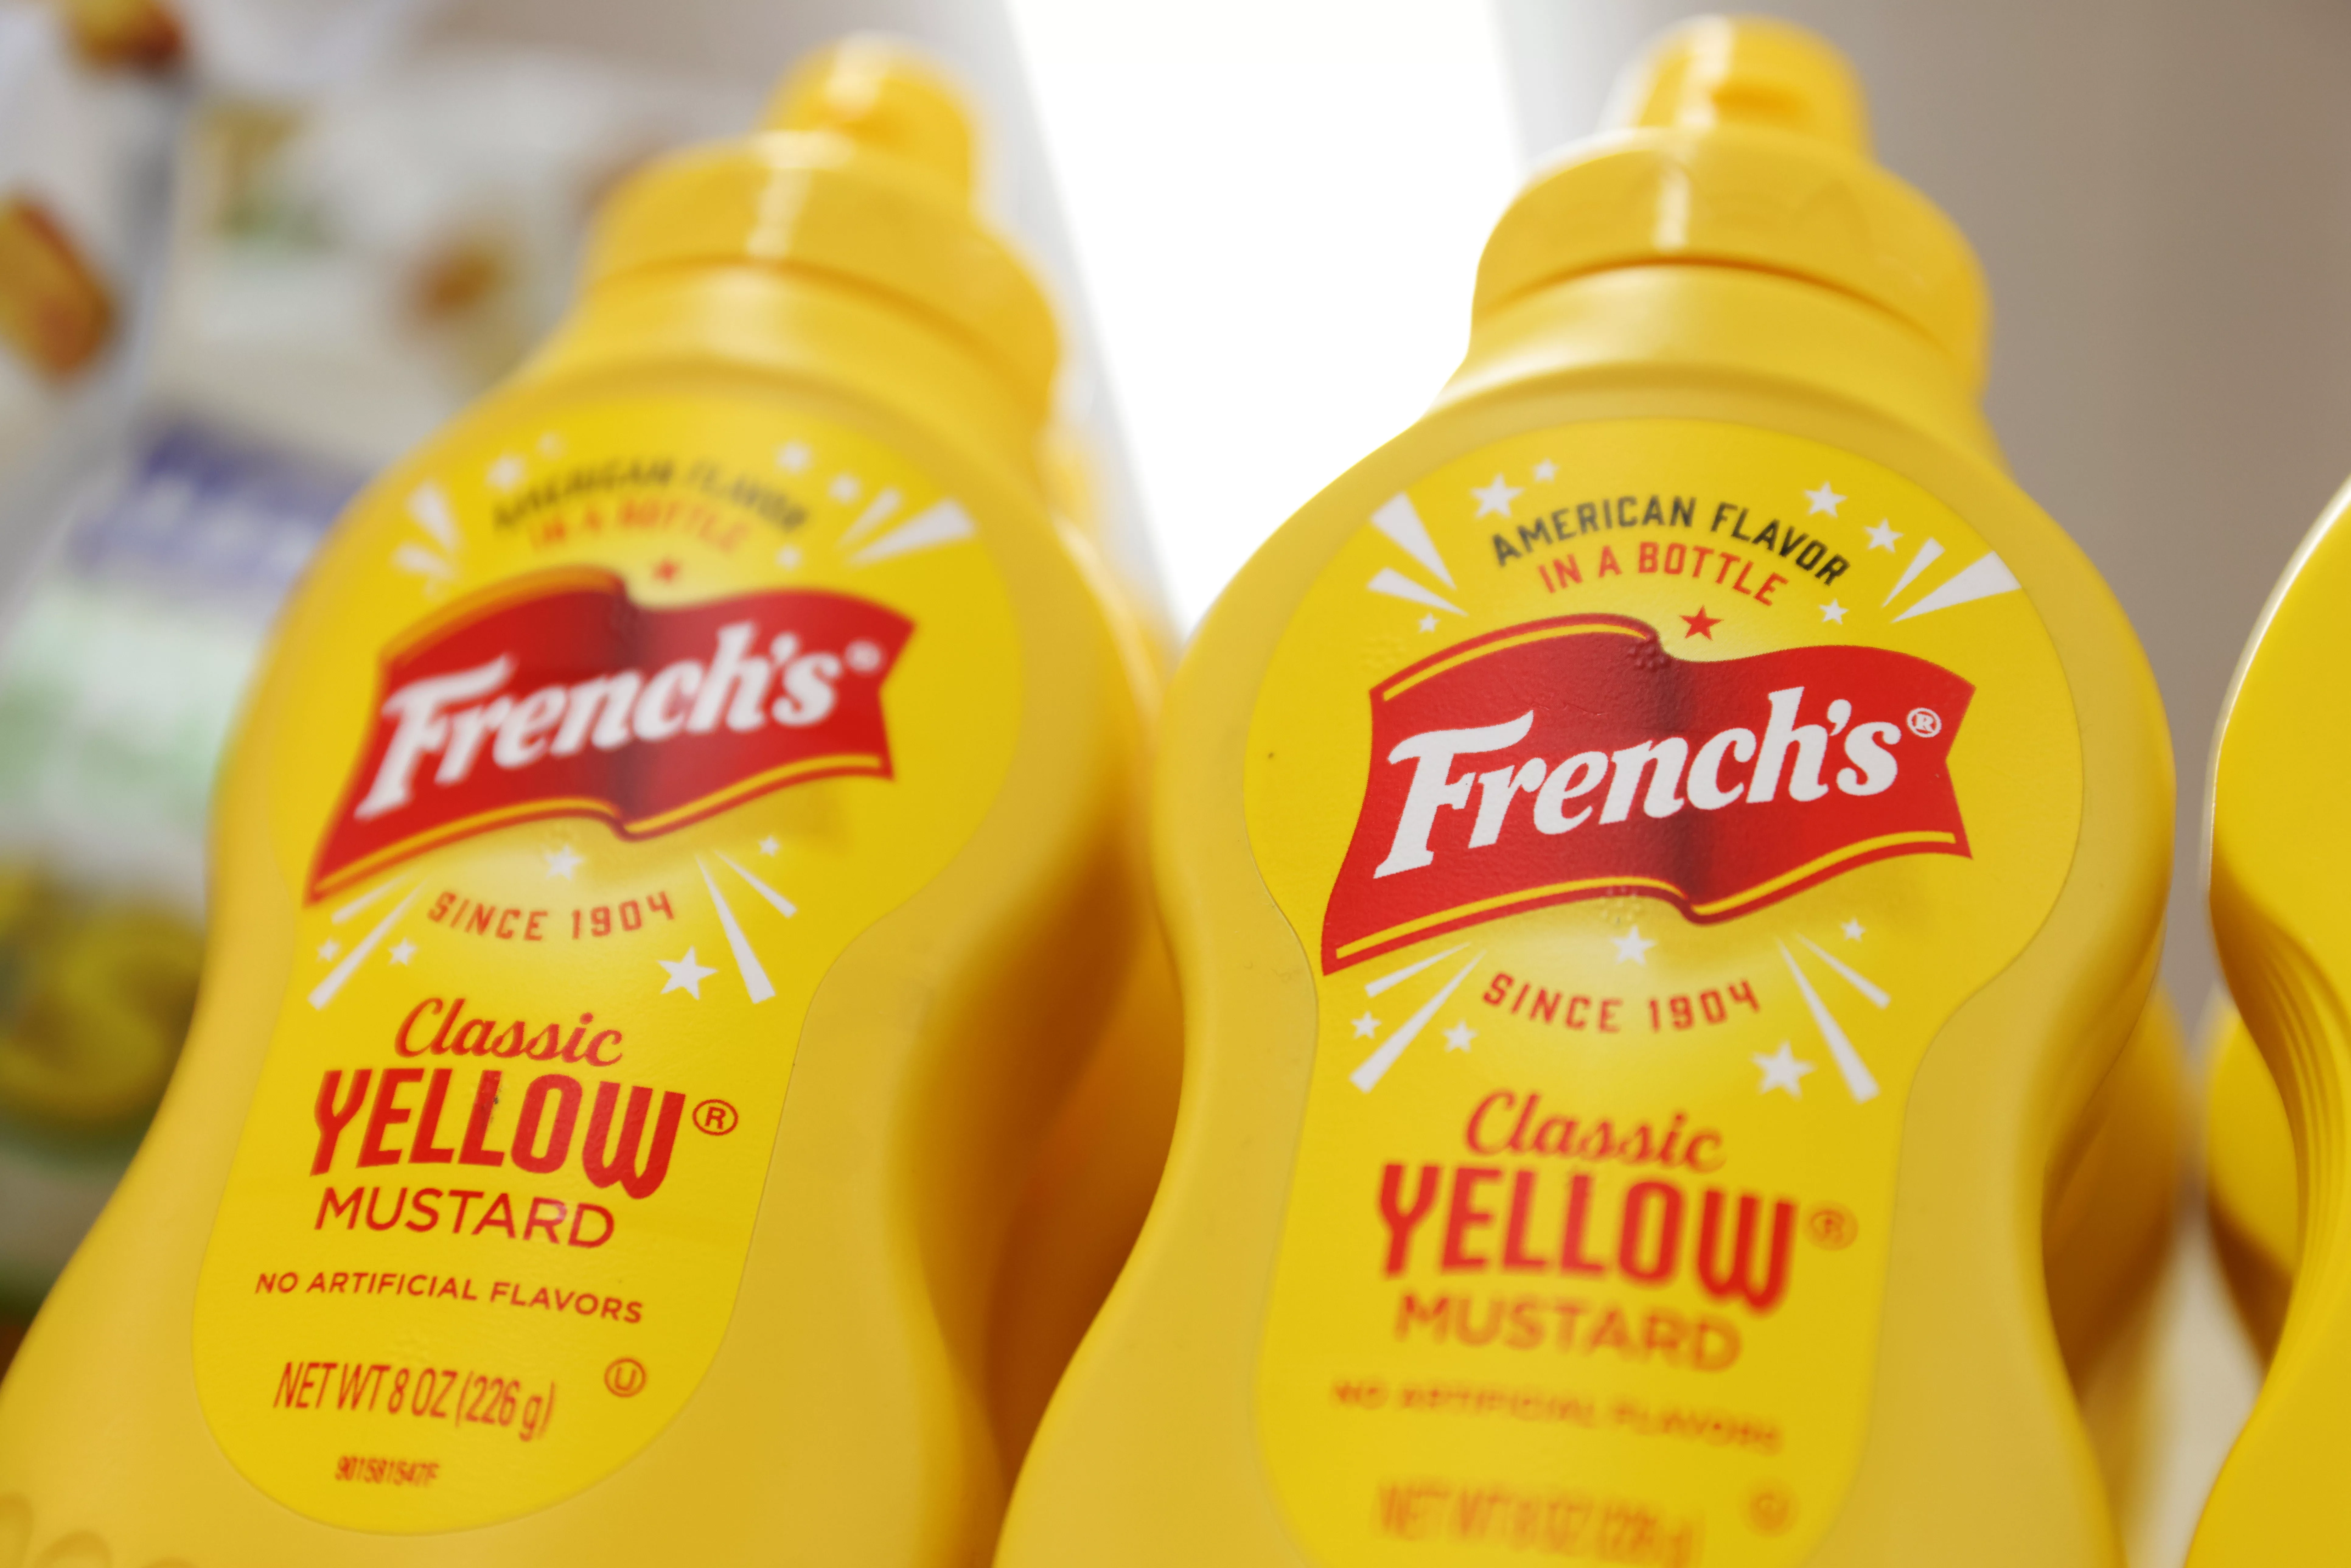 frenchs-classic-yellow-mustard-a-brand-of-mccormick-company-is-seen-on-display-in-a-store-in-manhattan-new-york-city